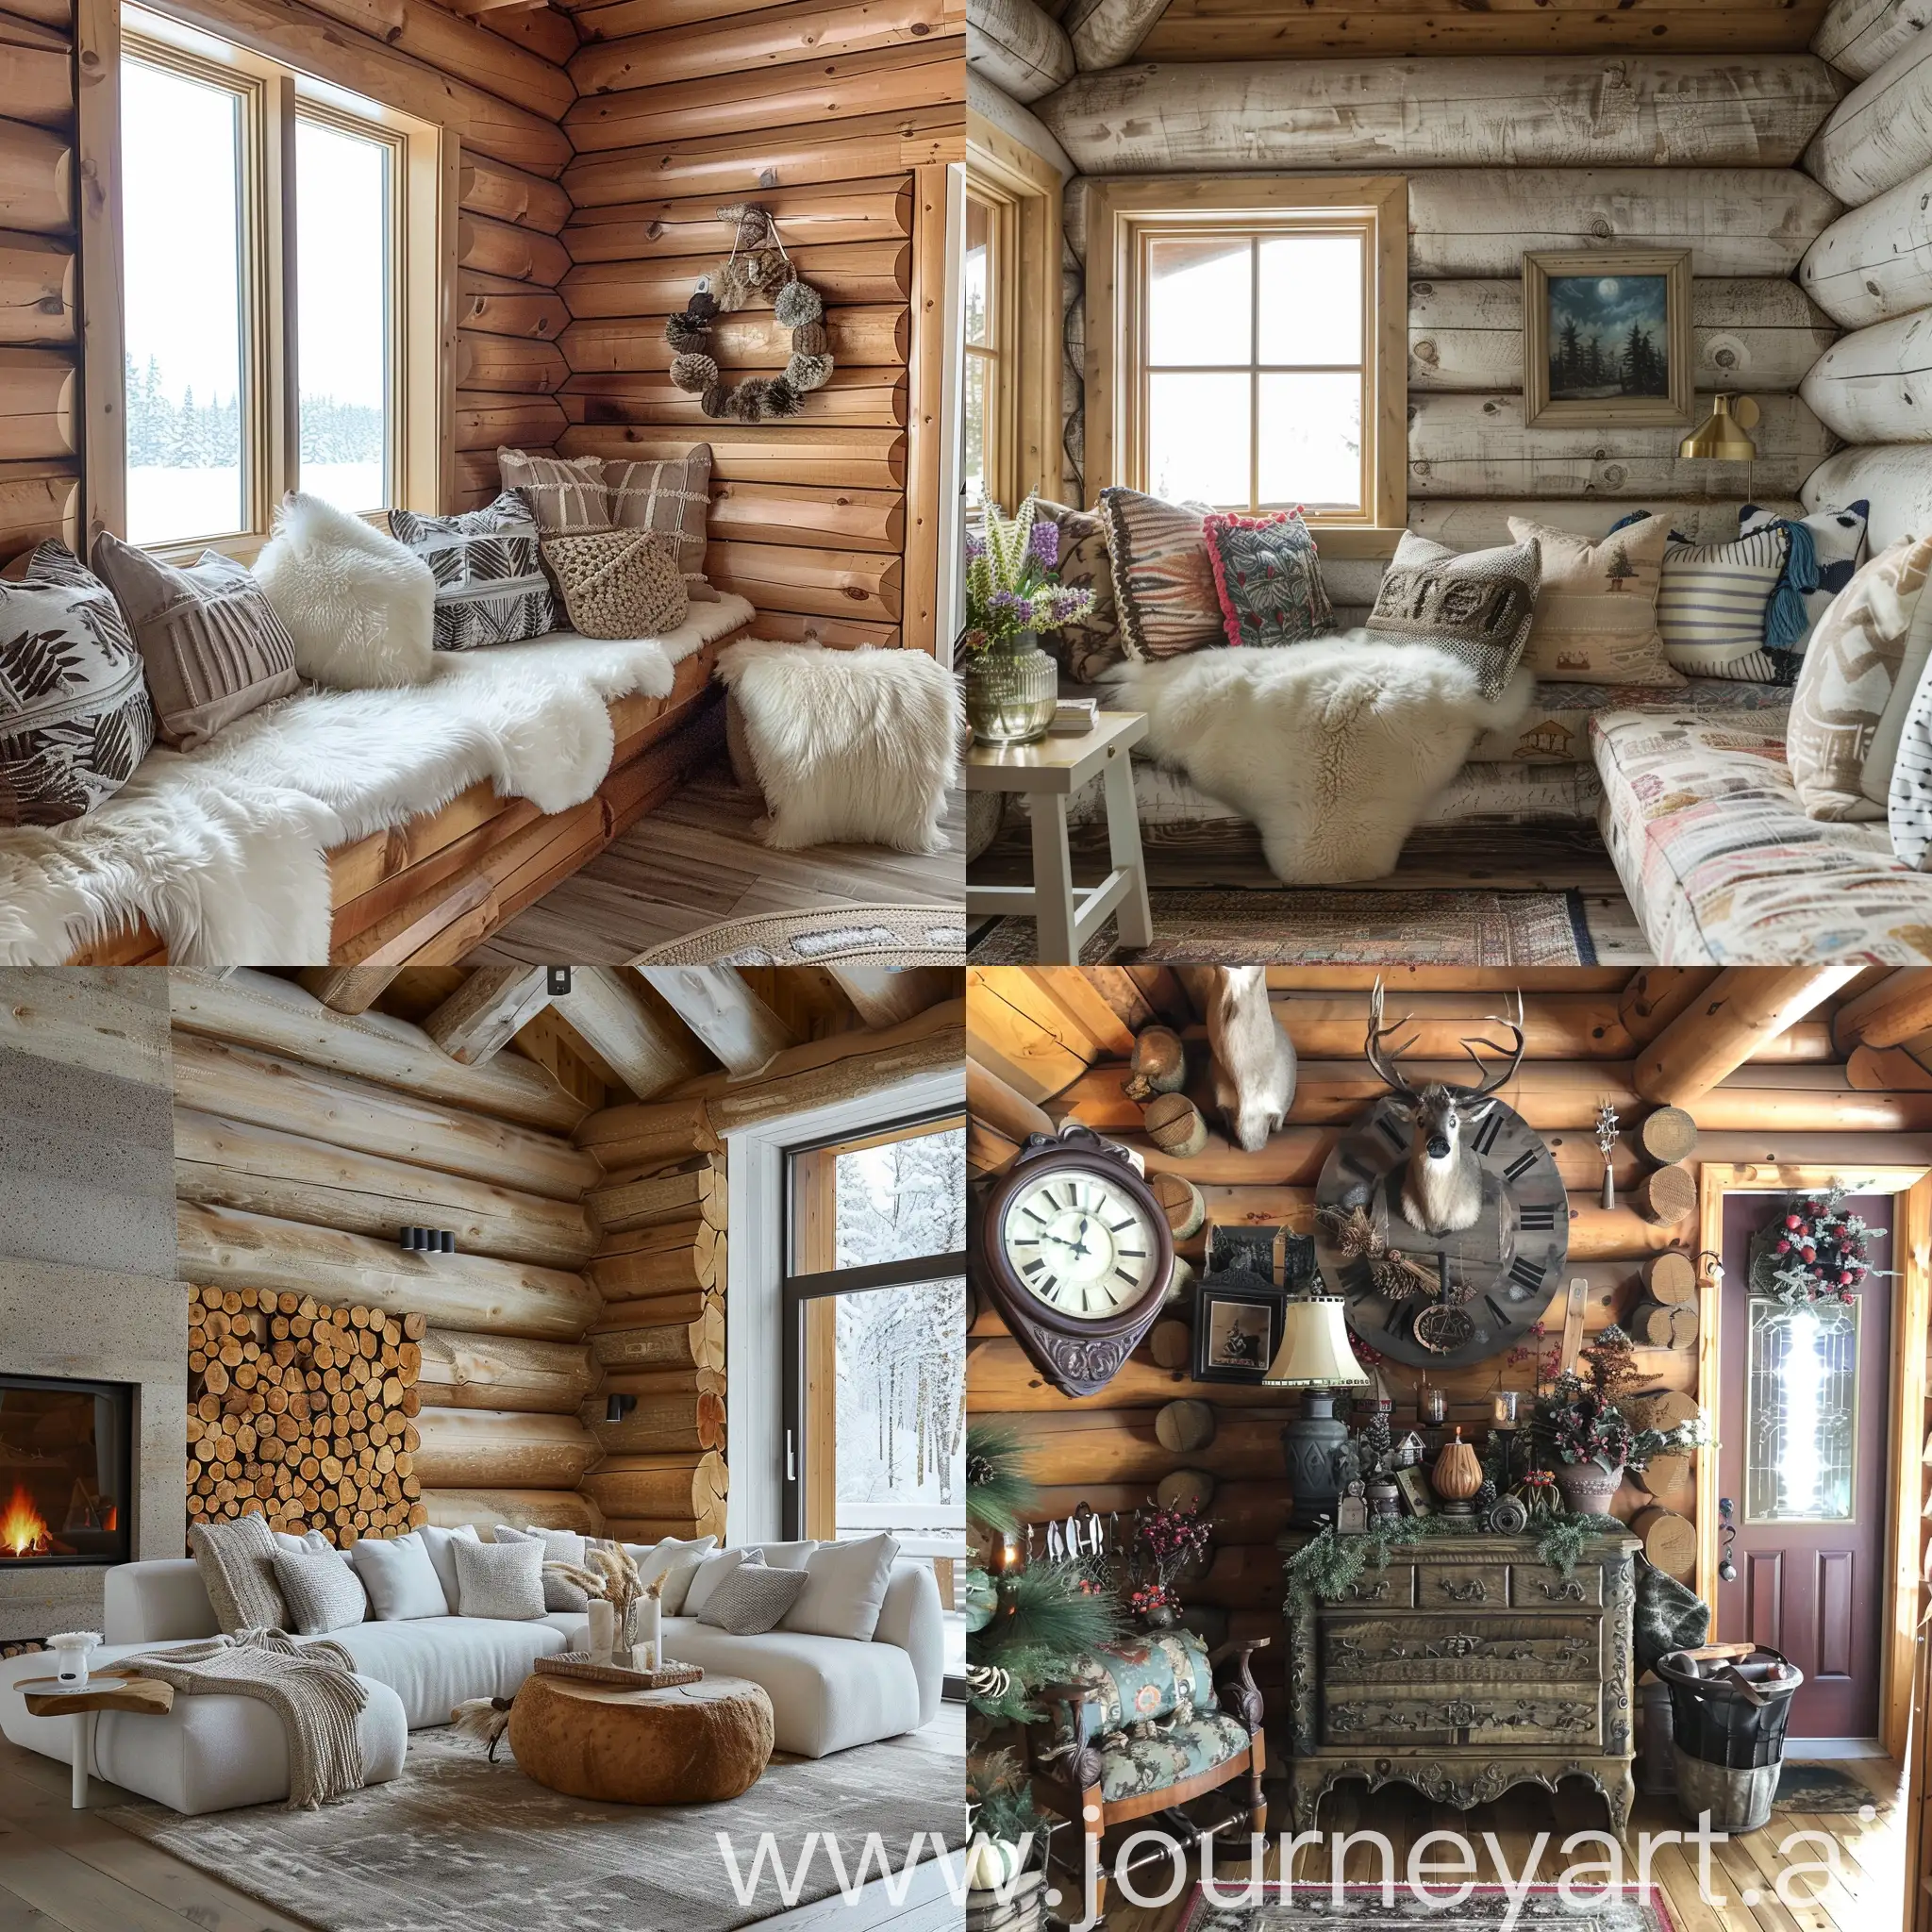 Rustic-Log-Cabin-Wall-Decor-Charming-Interior-Design-with-Vintage-Appeal